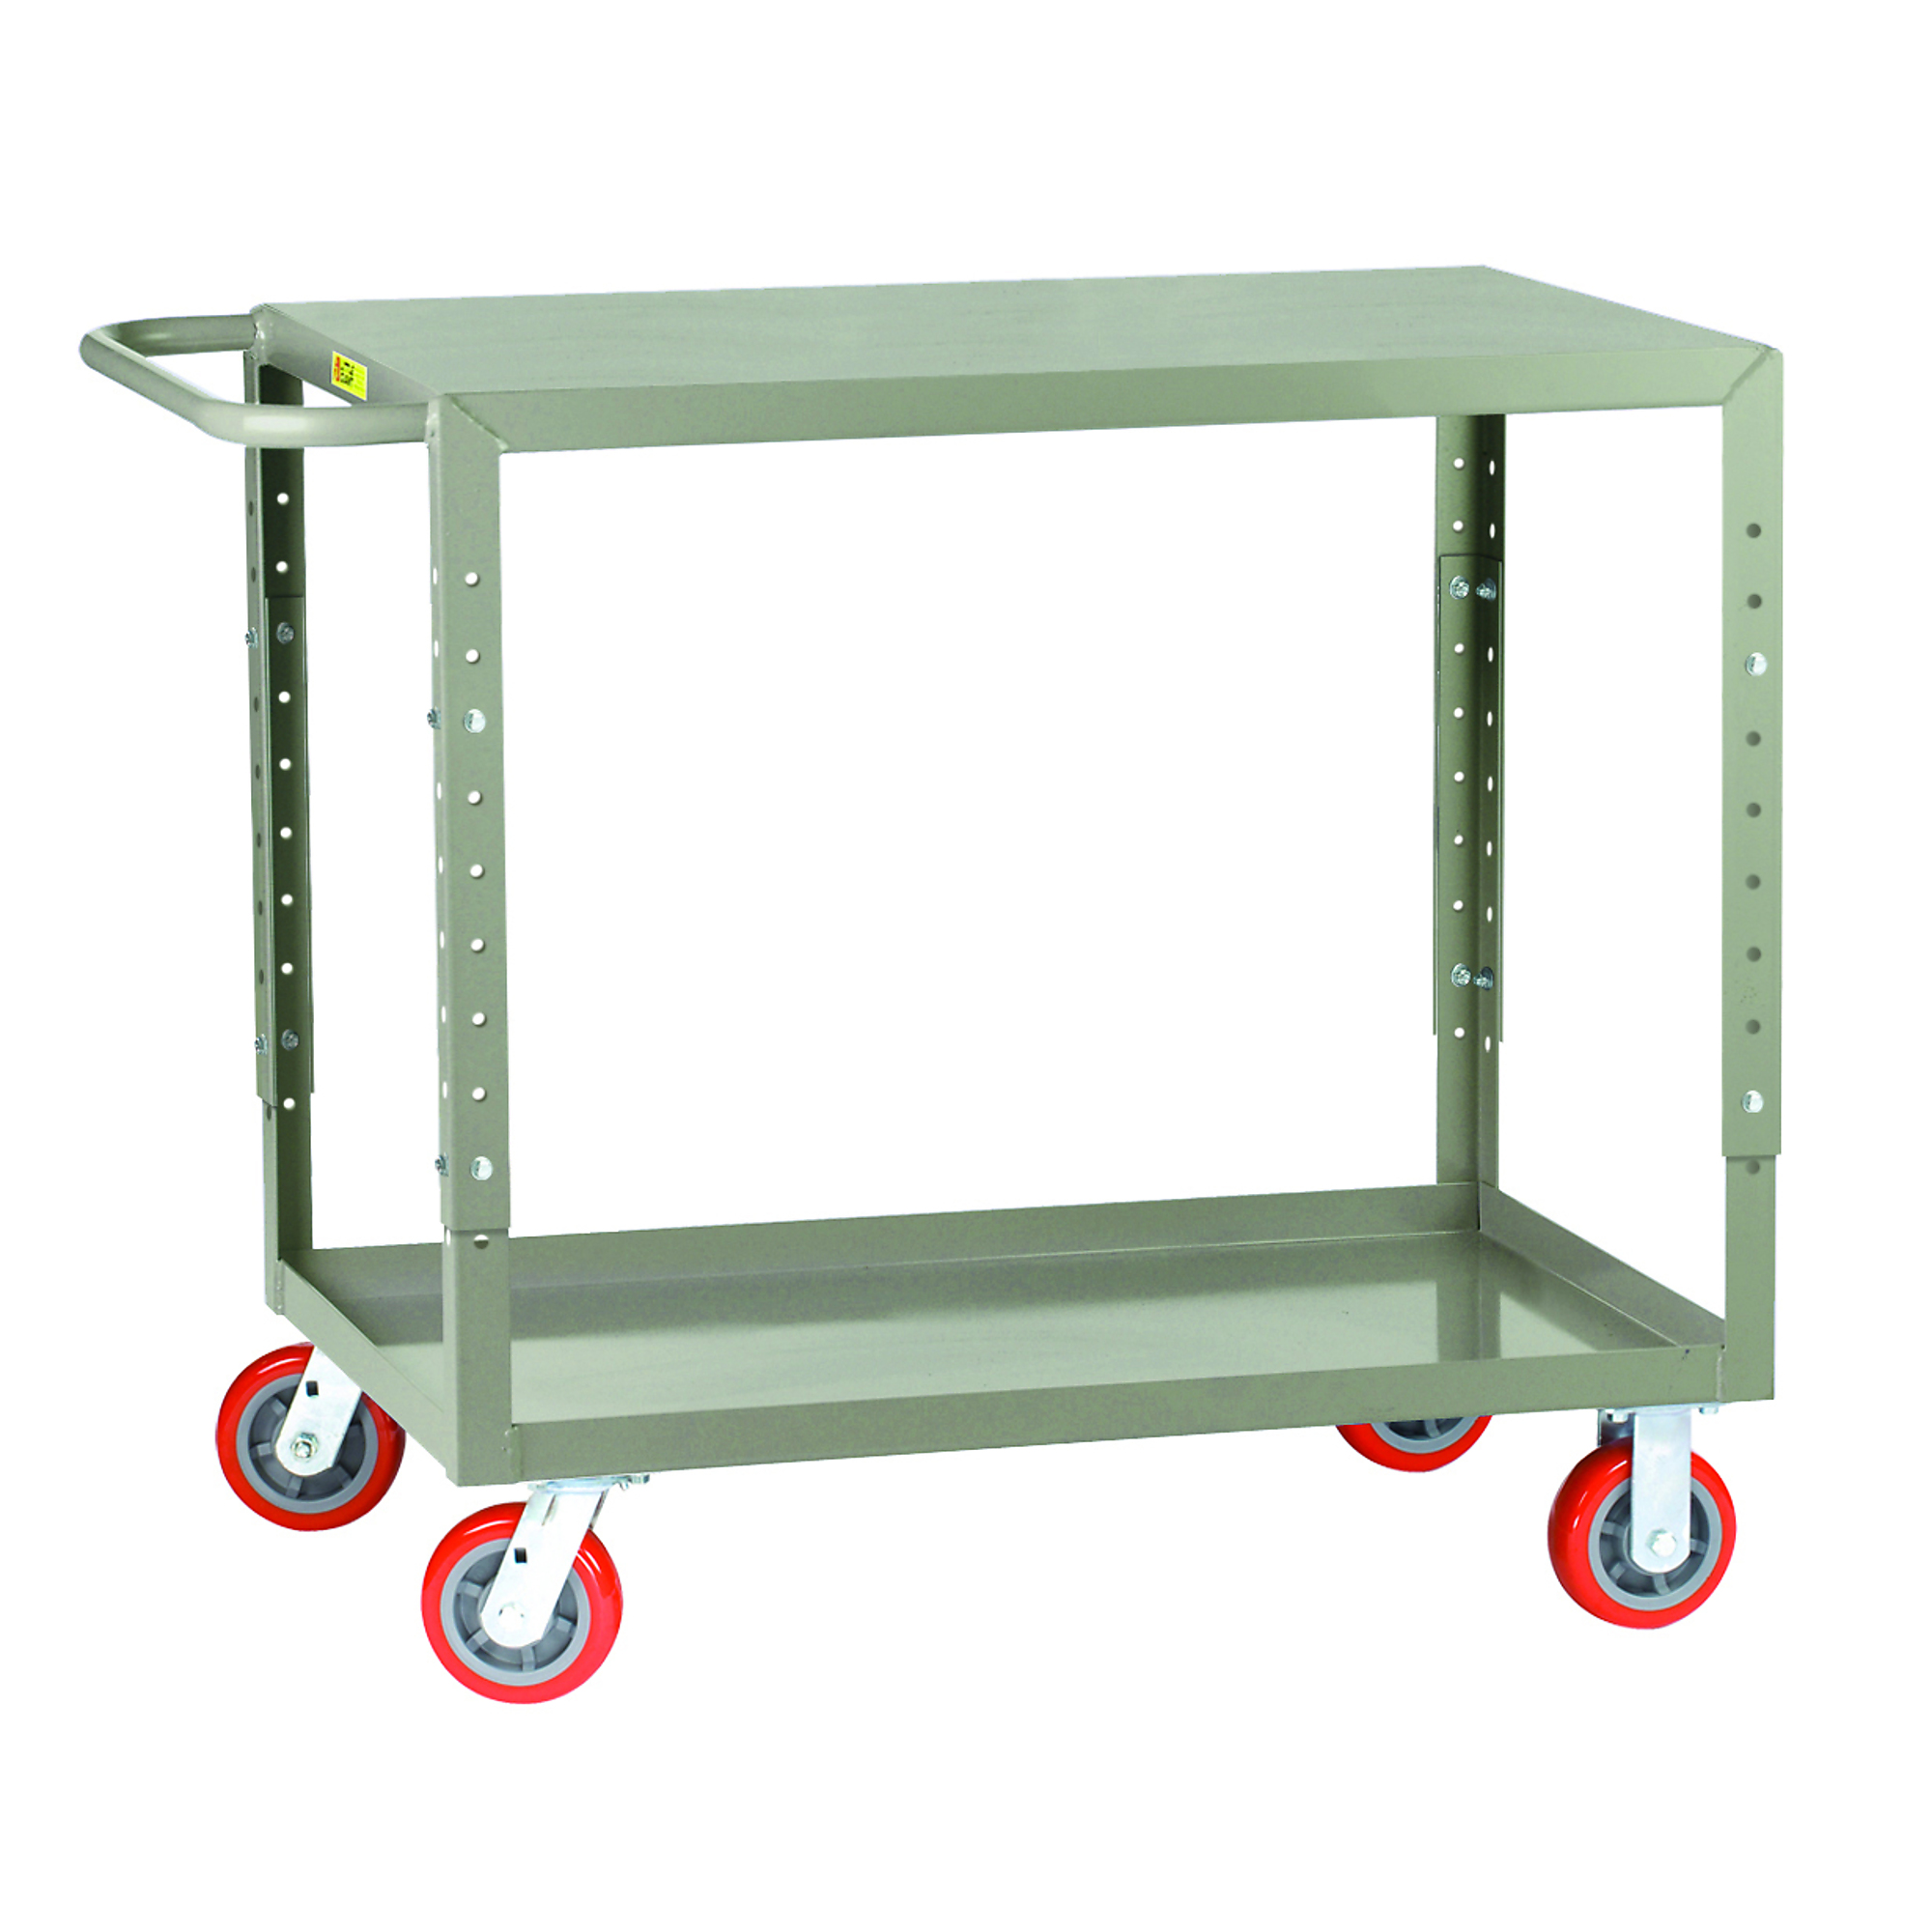 Little Giant, Adj. Height Welded Service Cart, 30x60, 1200 lbs, Total Capacity 1200 lb, Shelves (qty.) 2, Material Carbon Steel, Model LG-3060-5PYBKAH